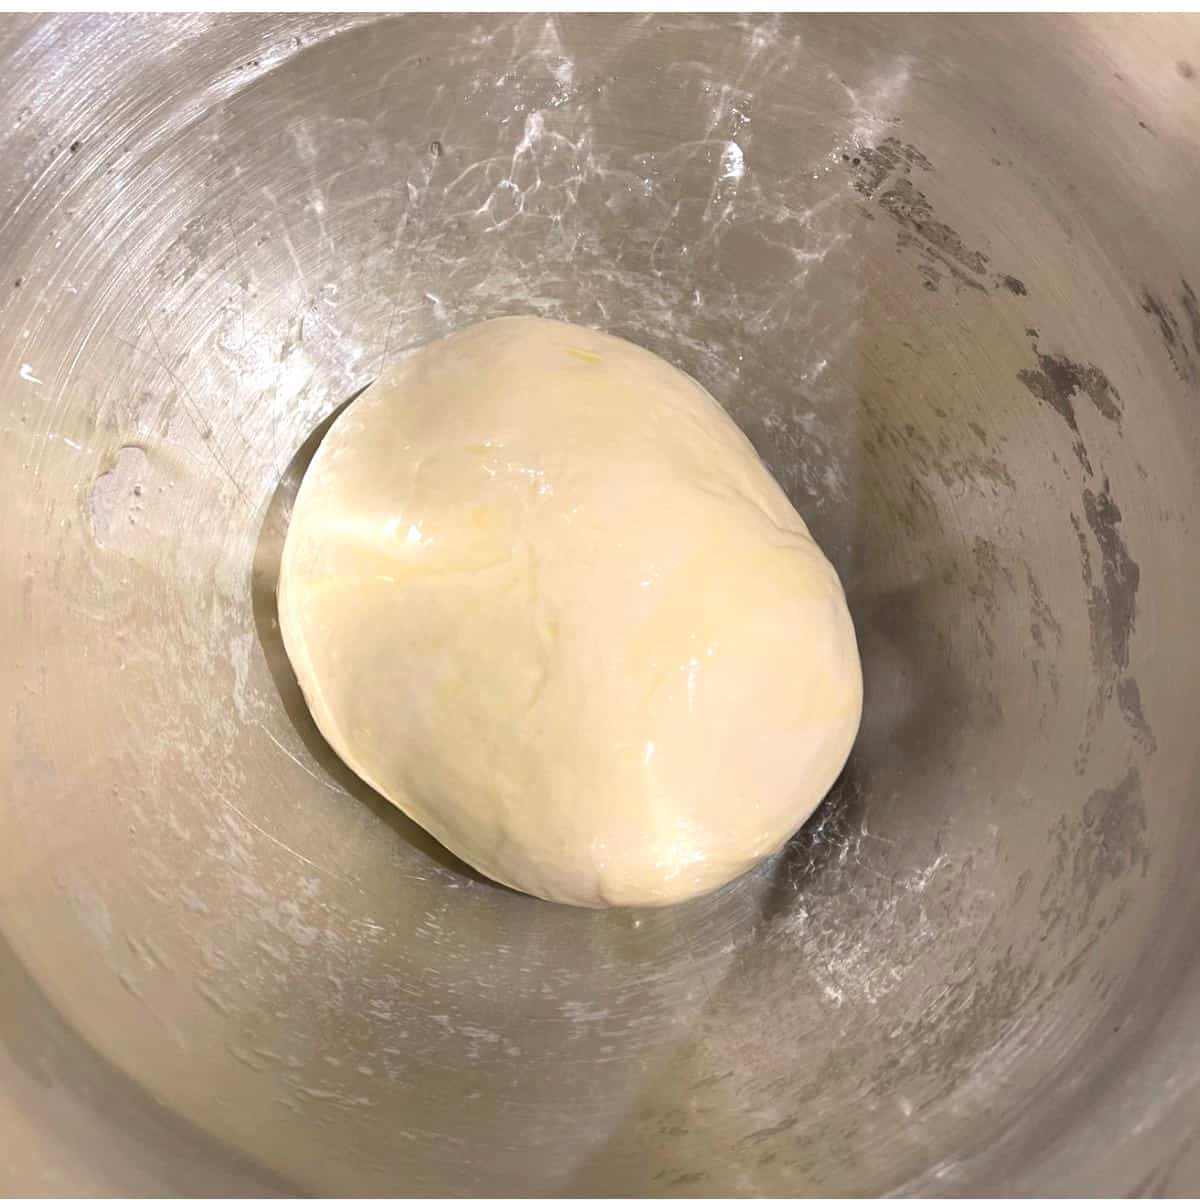 Smooth ball of kneaded dough in oiled bowl.